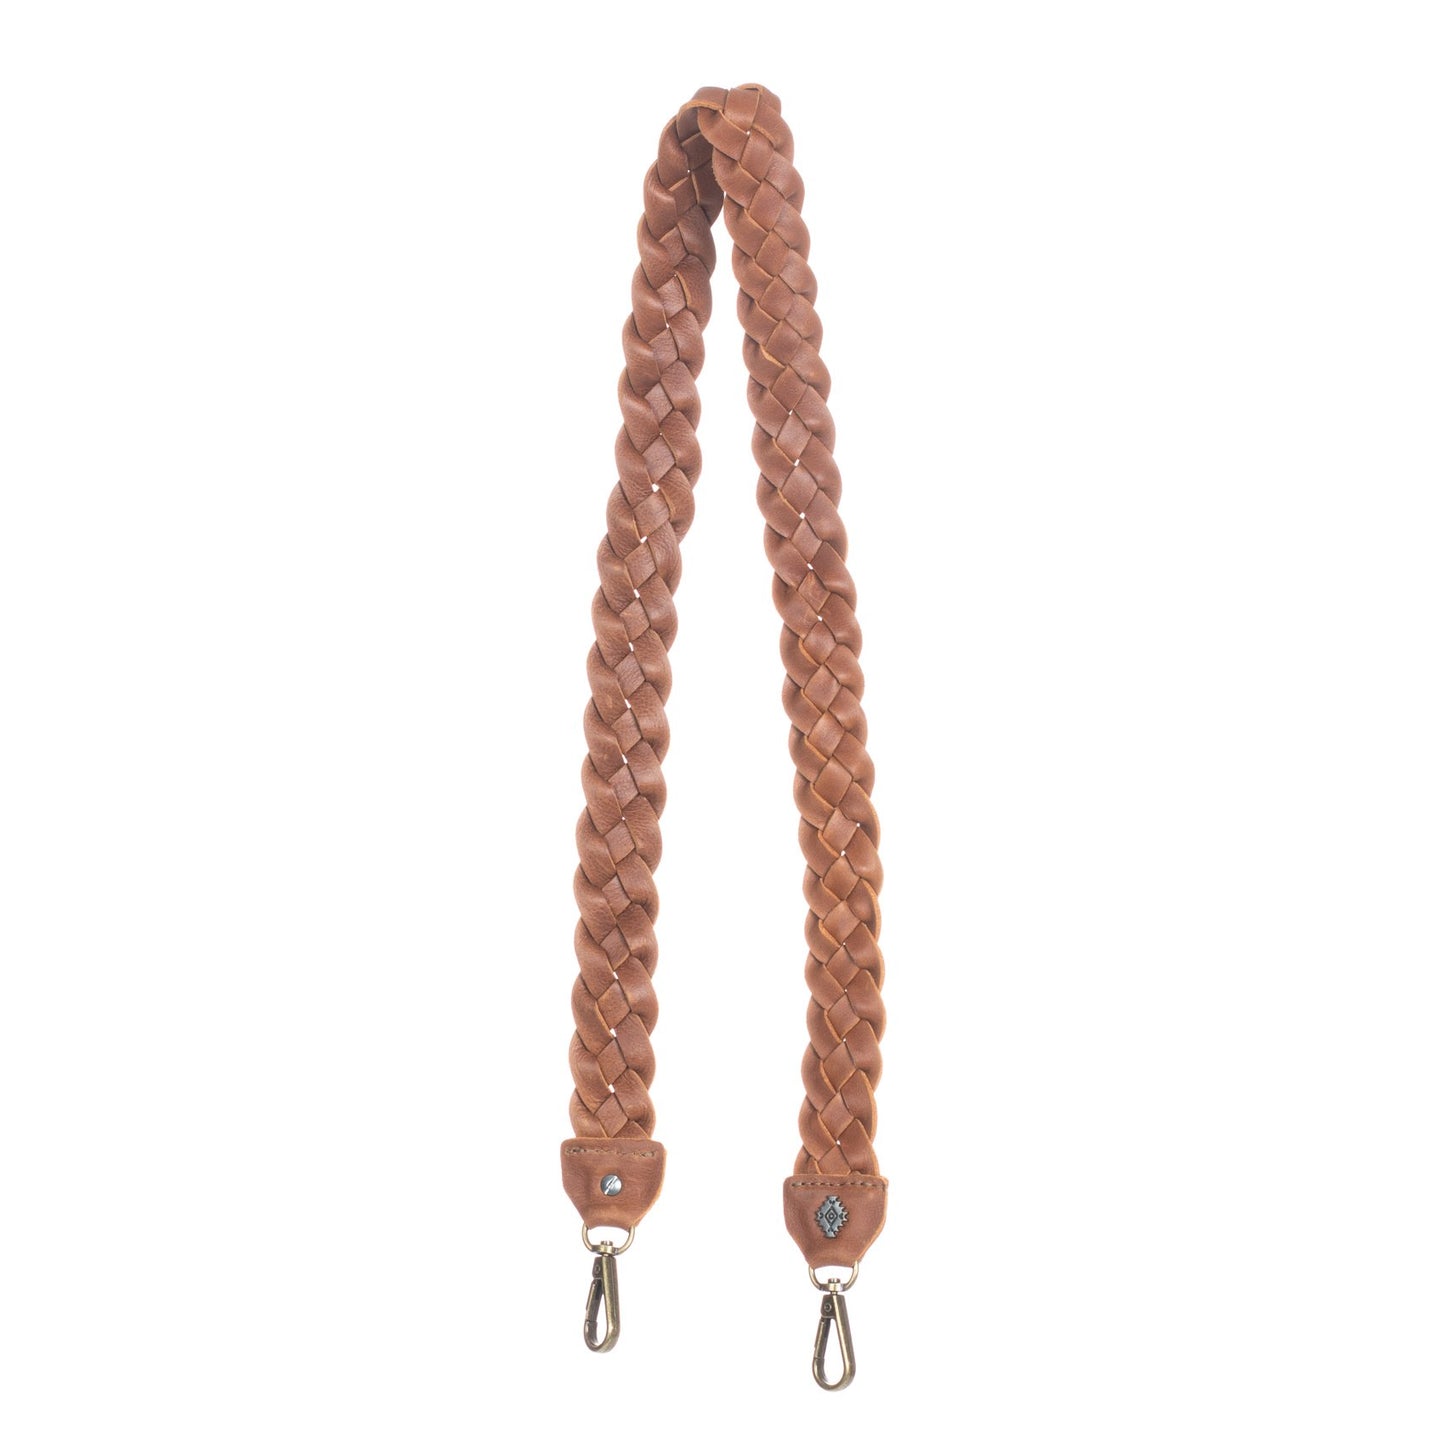 Braided Leather Purse Straps -  New Zealand